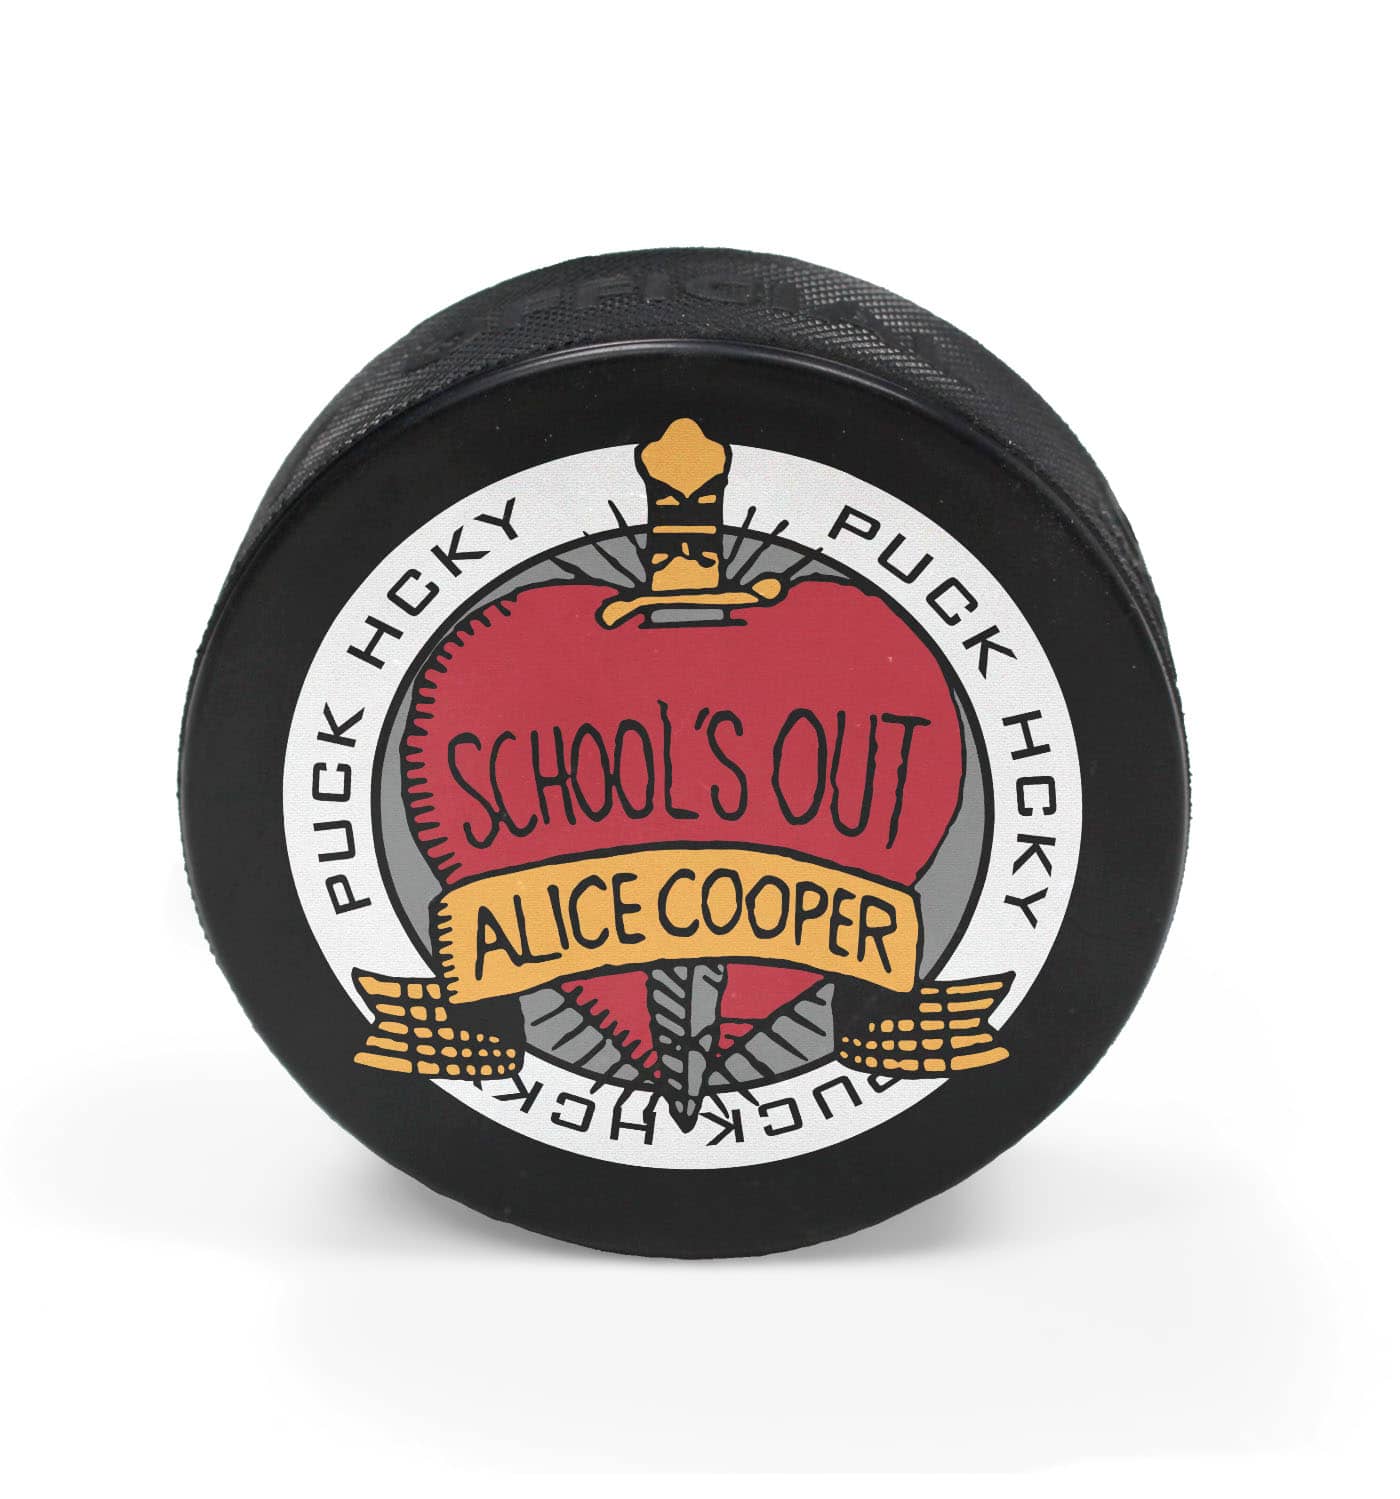 ALICE COOPER ‘SCHOOLS OUT’ limited edition hockey puck